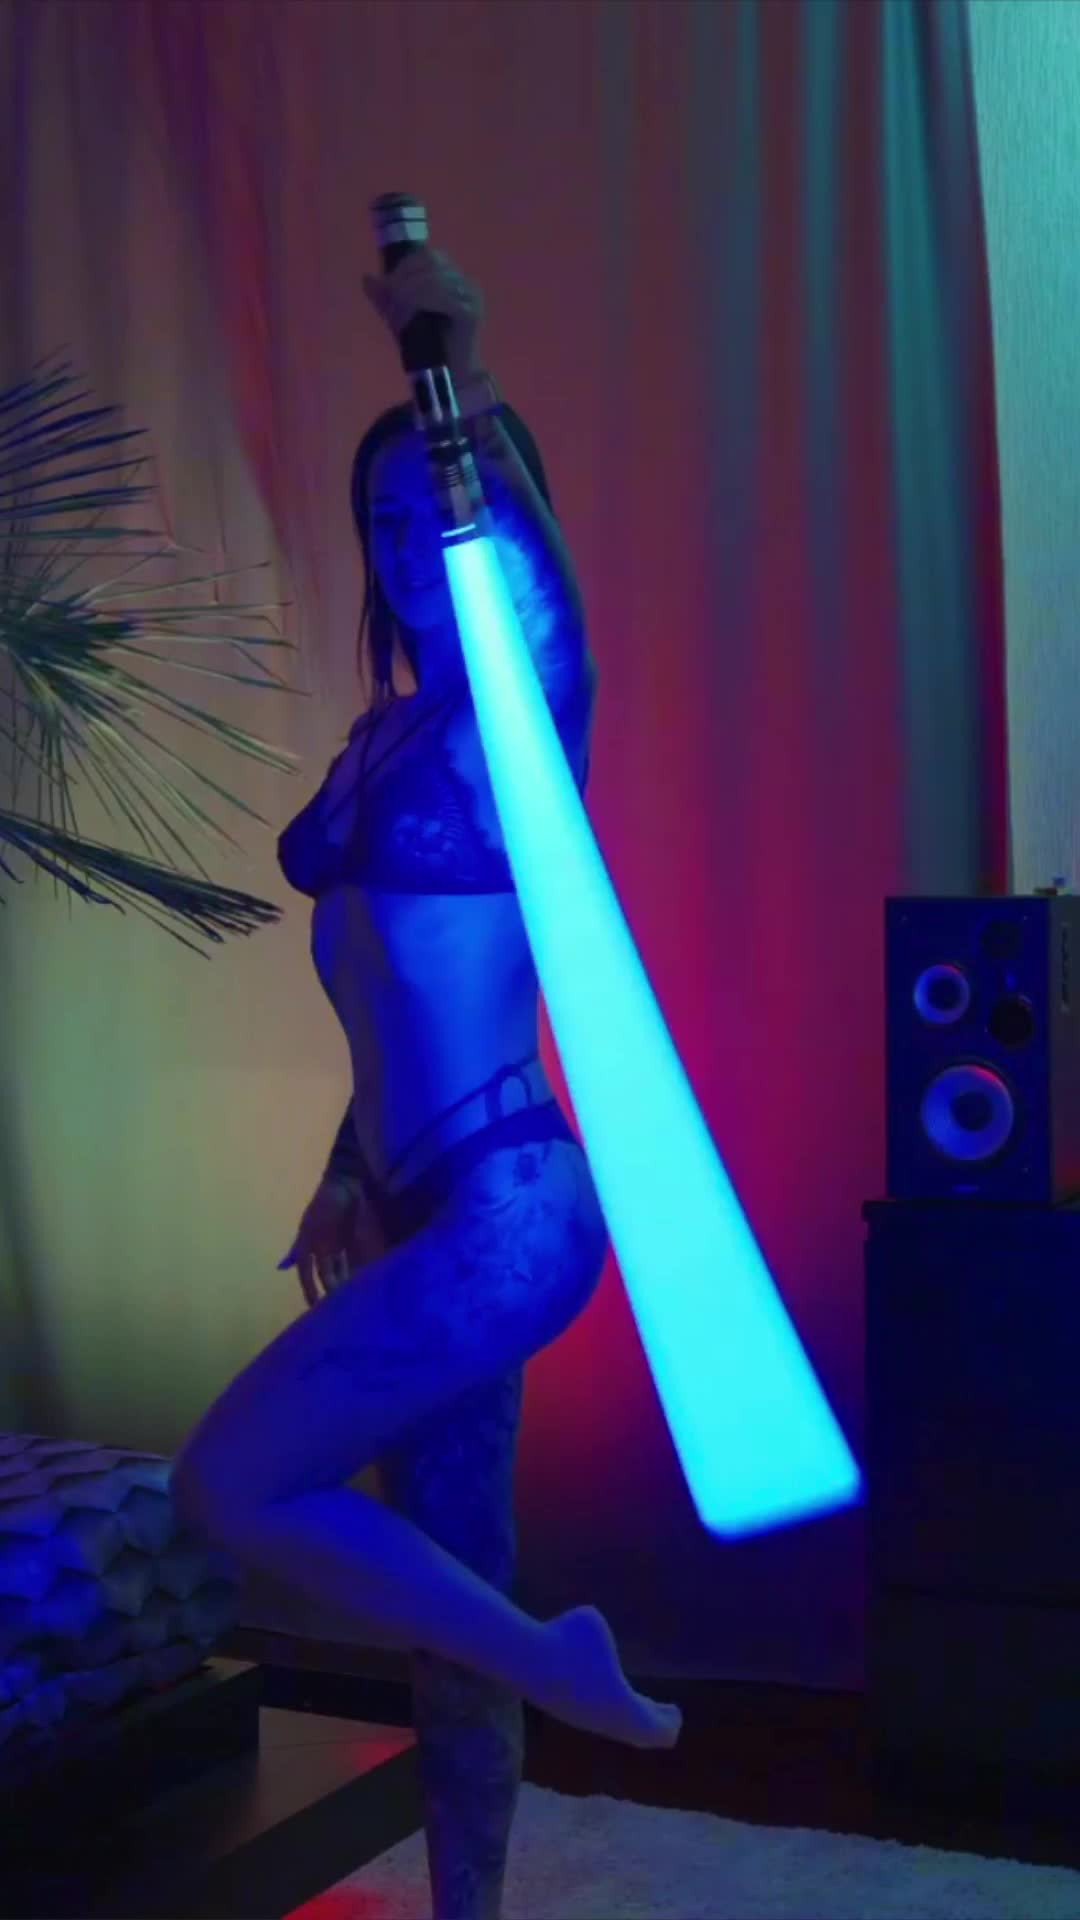 Watch the Video by Stripchat with the username @Stripchat, who is a brand user, posted on May 13, 2021. The post is about the topic Banned Tik Tok. and the text says 'If shes this good with a light saber, imagine how good she would be with your light saber ;) [GirlGogo]'